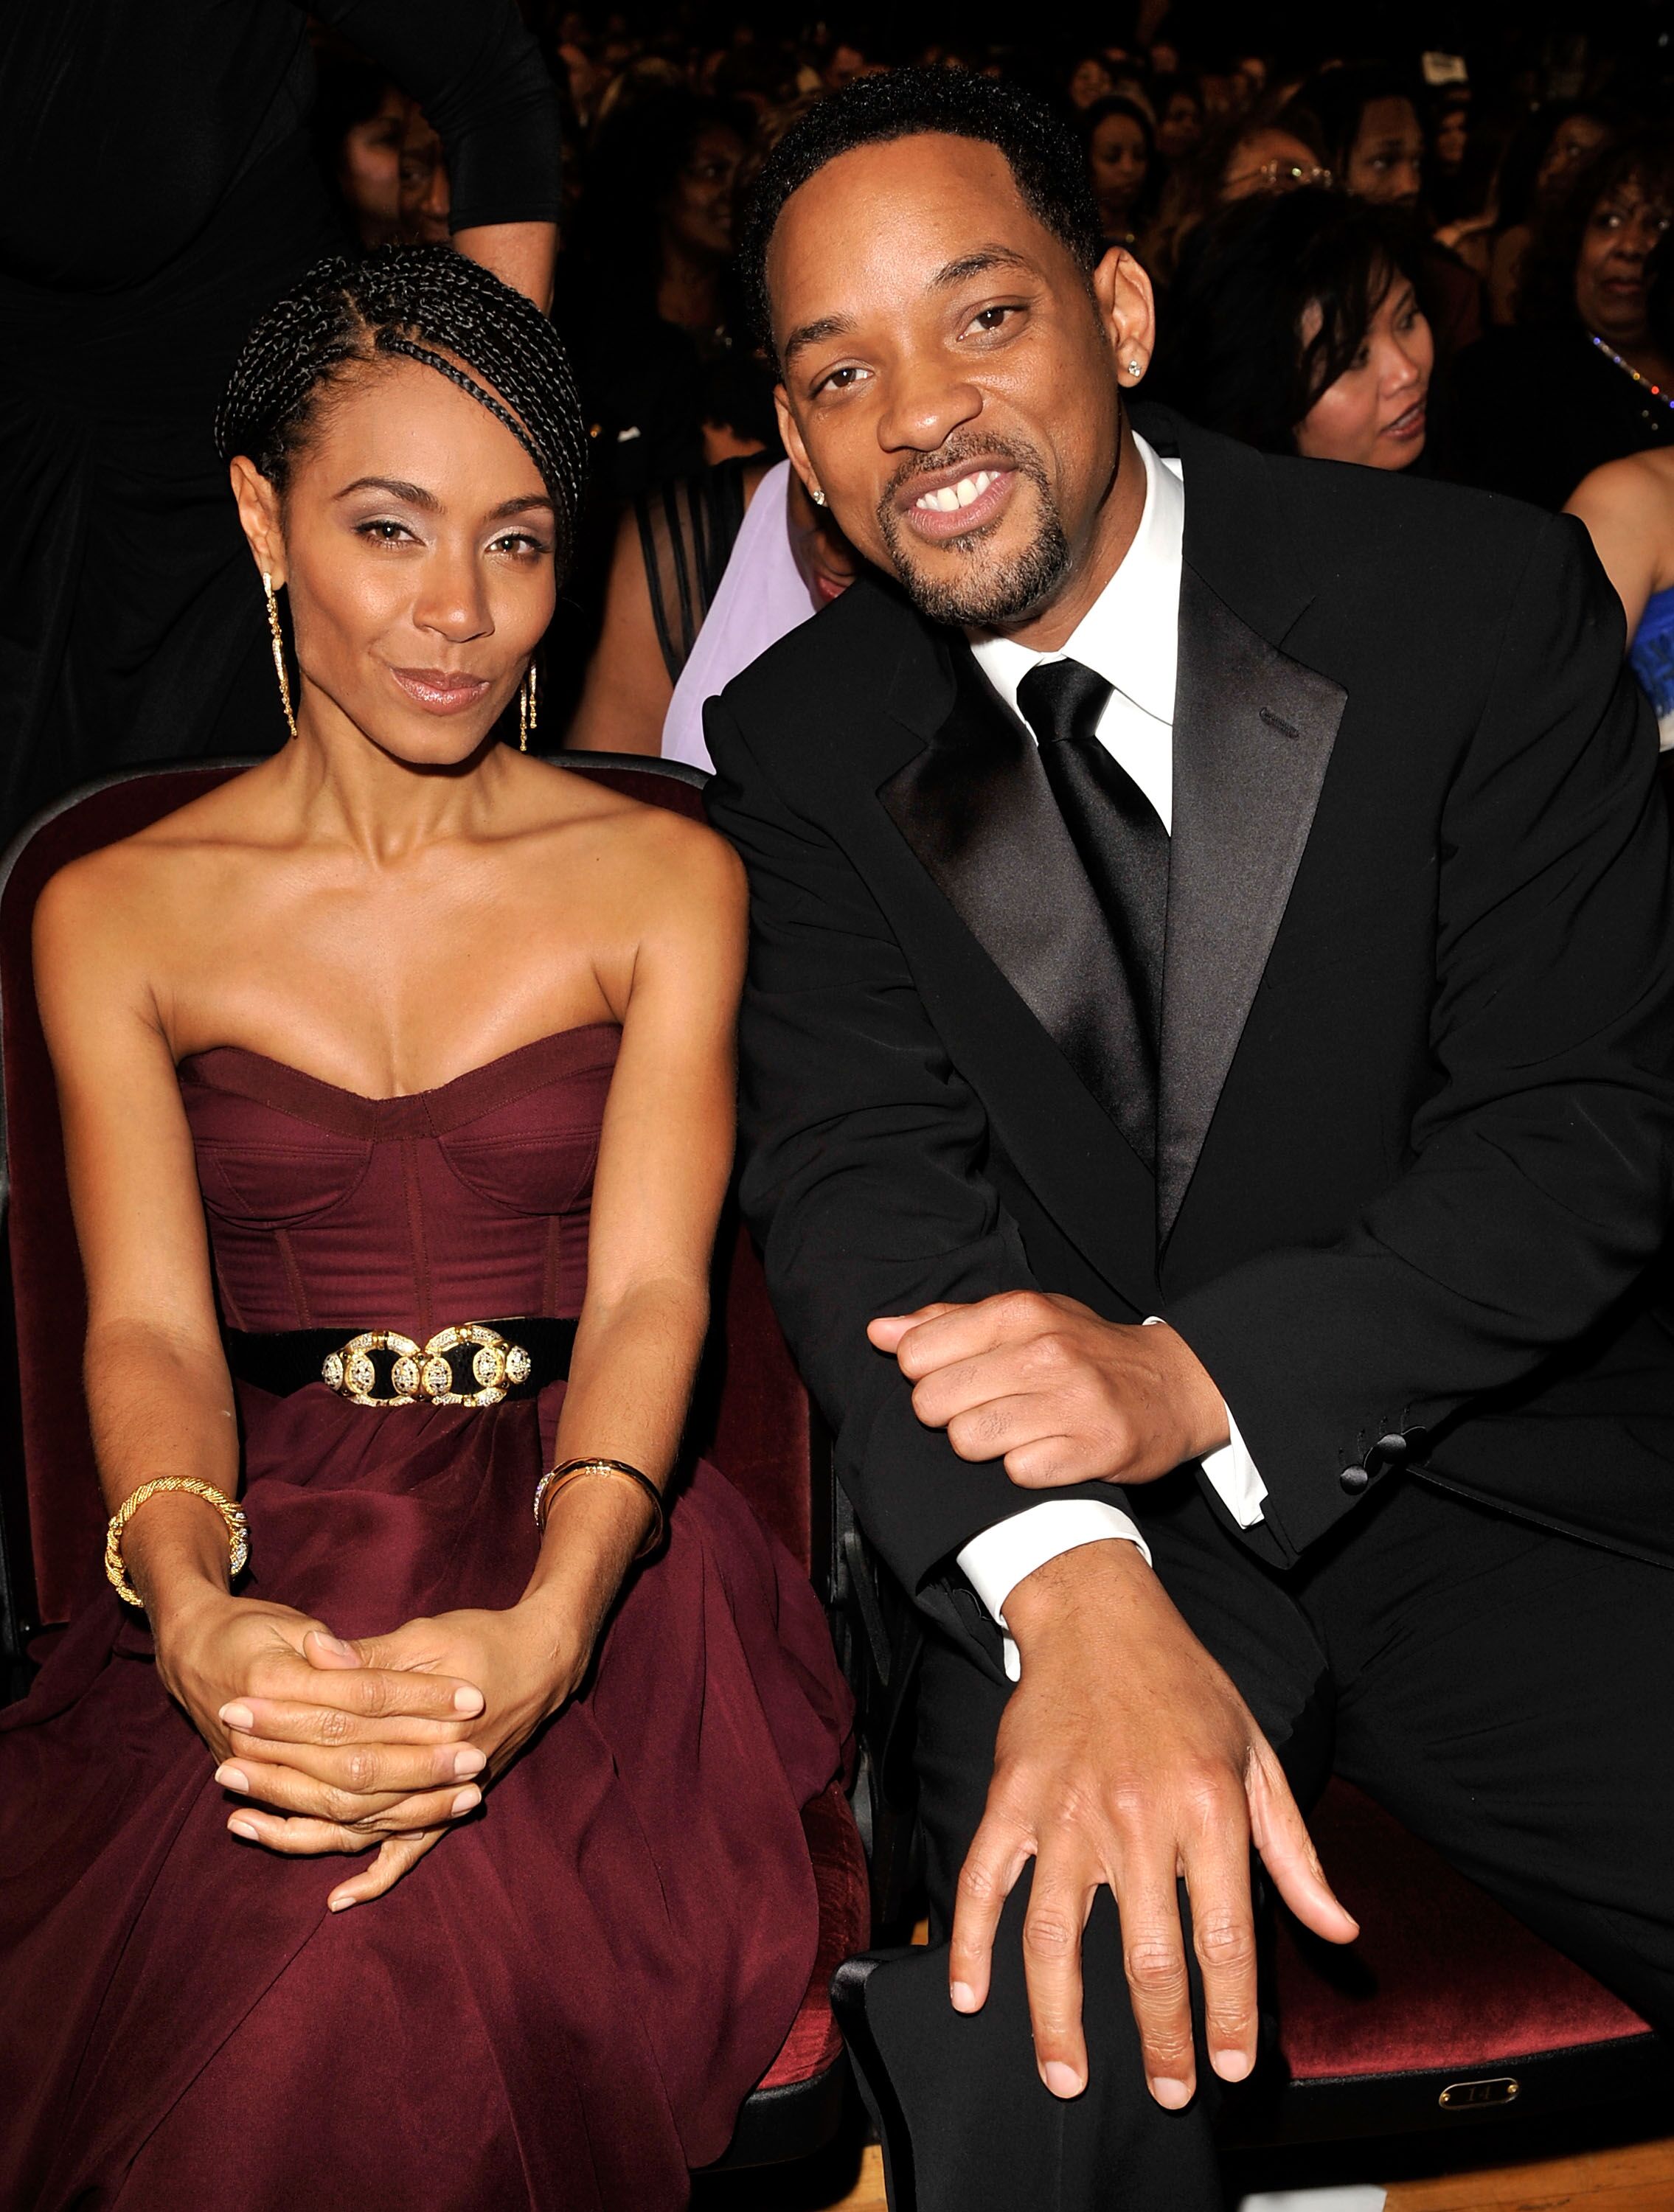  Jada Pinkett Smith and Will Smith at the 40th NAACP Image Awards/ Source Getty Images